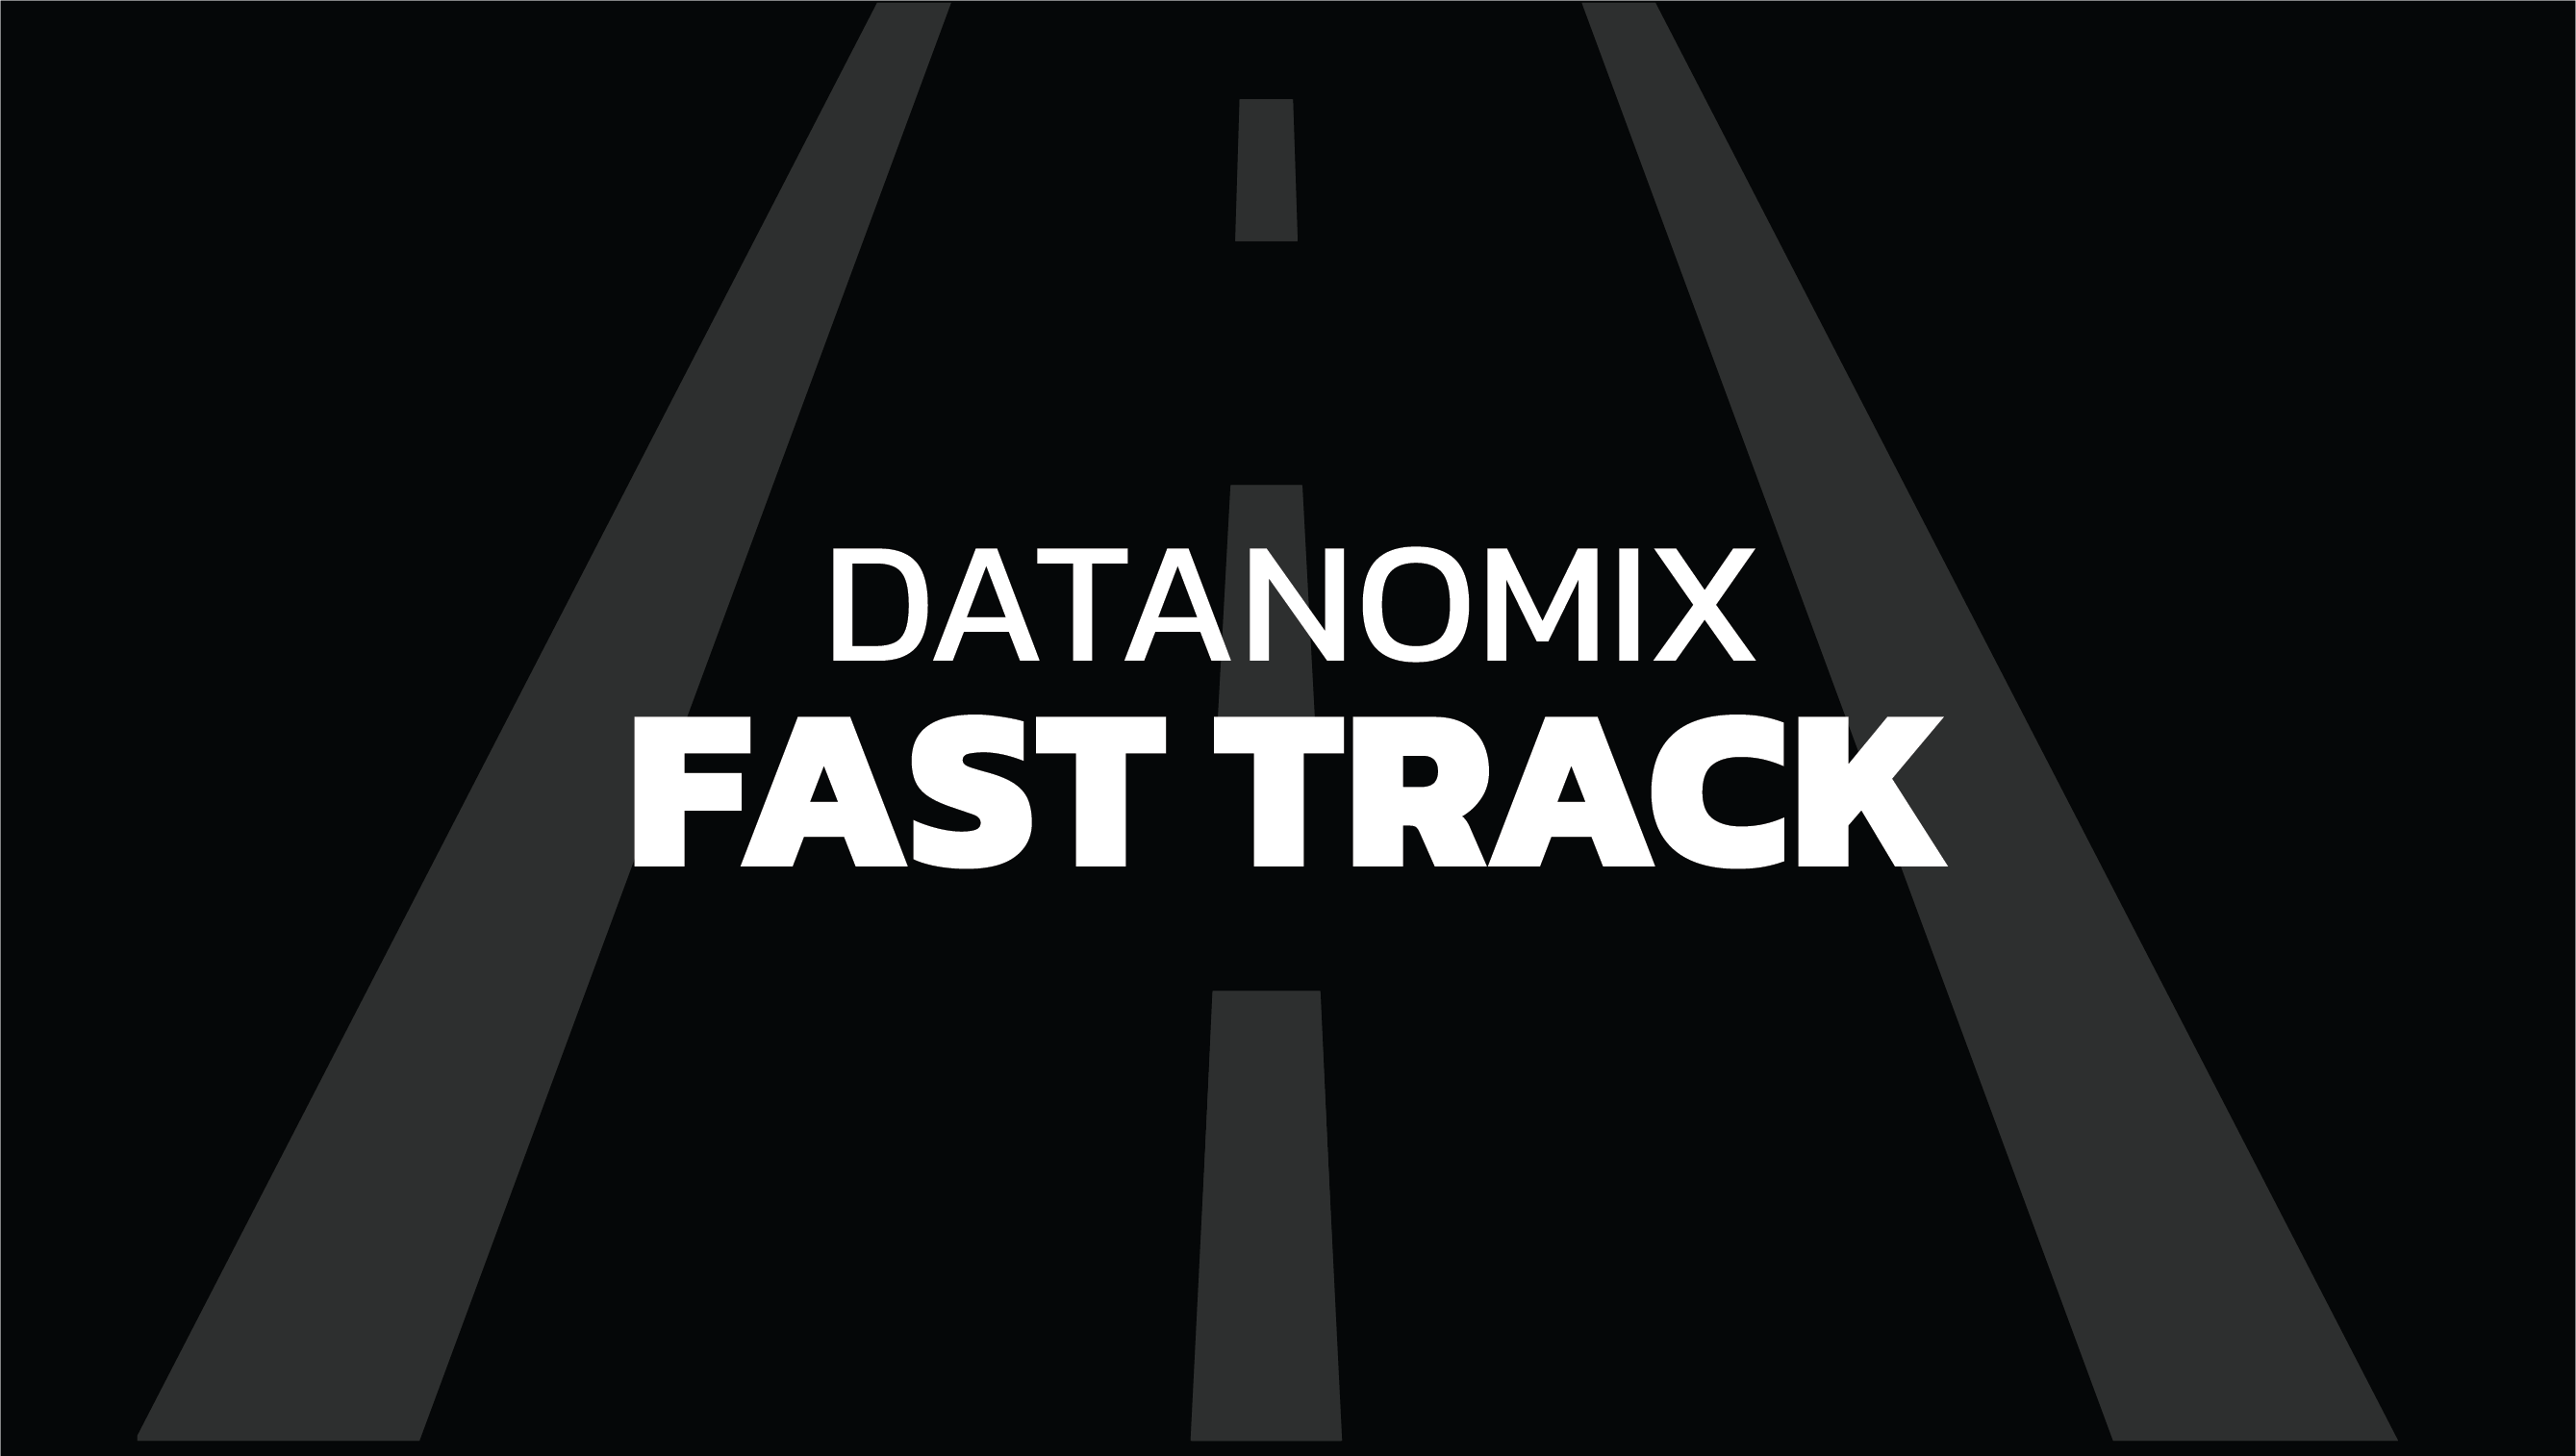 FAST TRACK DASHBOARDS